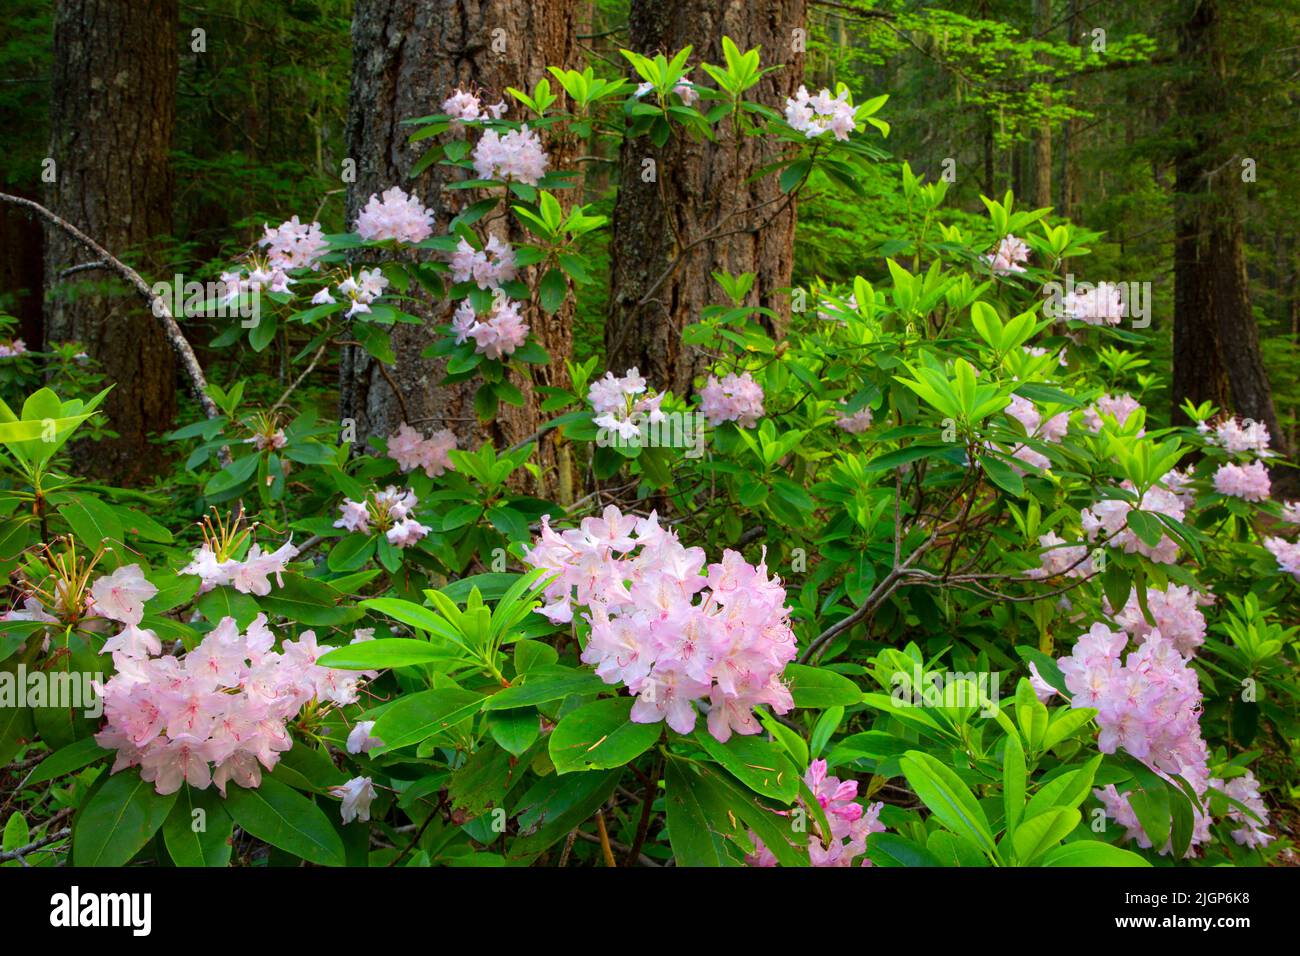 Pacific rhododendron (Rhododendron macrophyllum) in bloom, Willamette National Forest, Aufderheide National Scenic Byway, Oregon Stock Photo